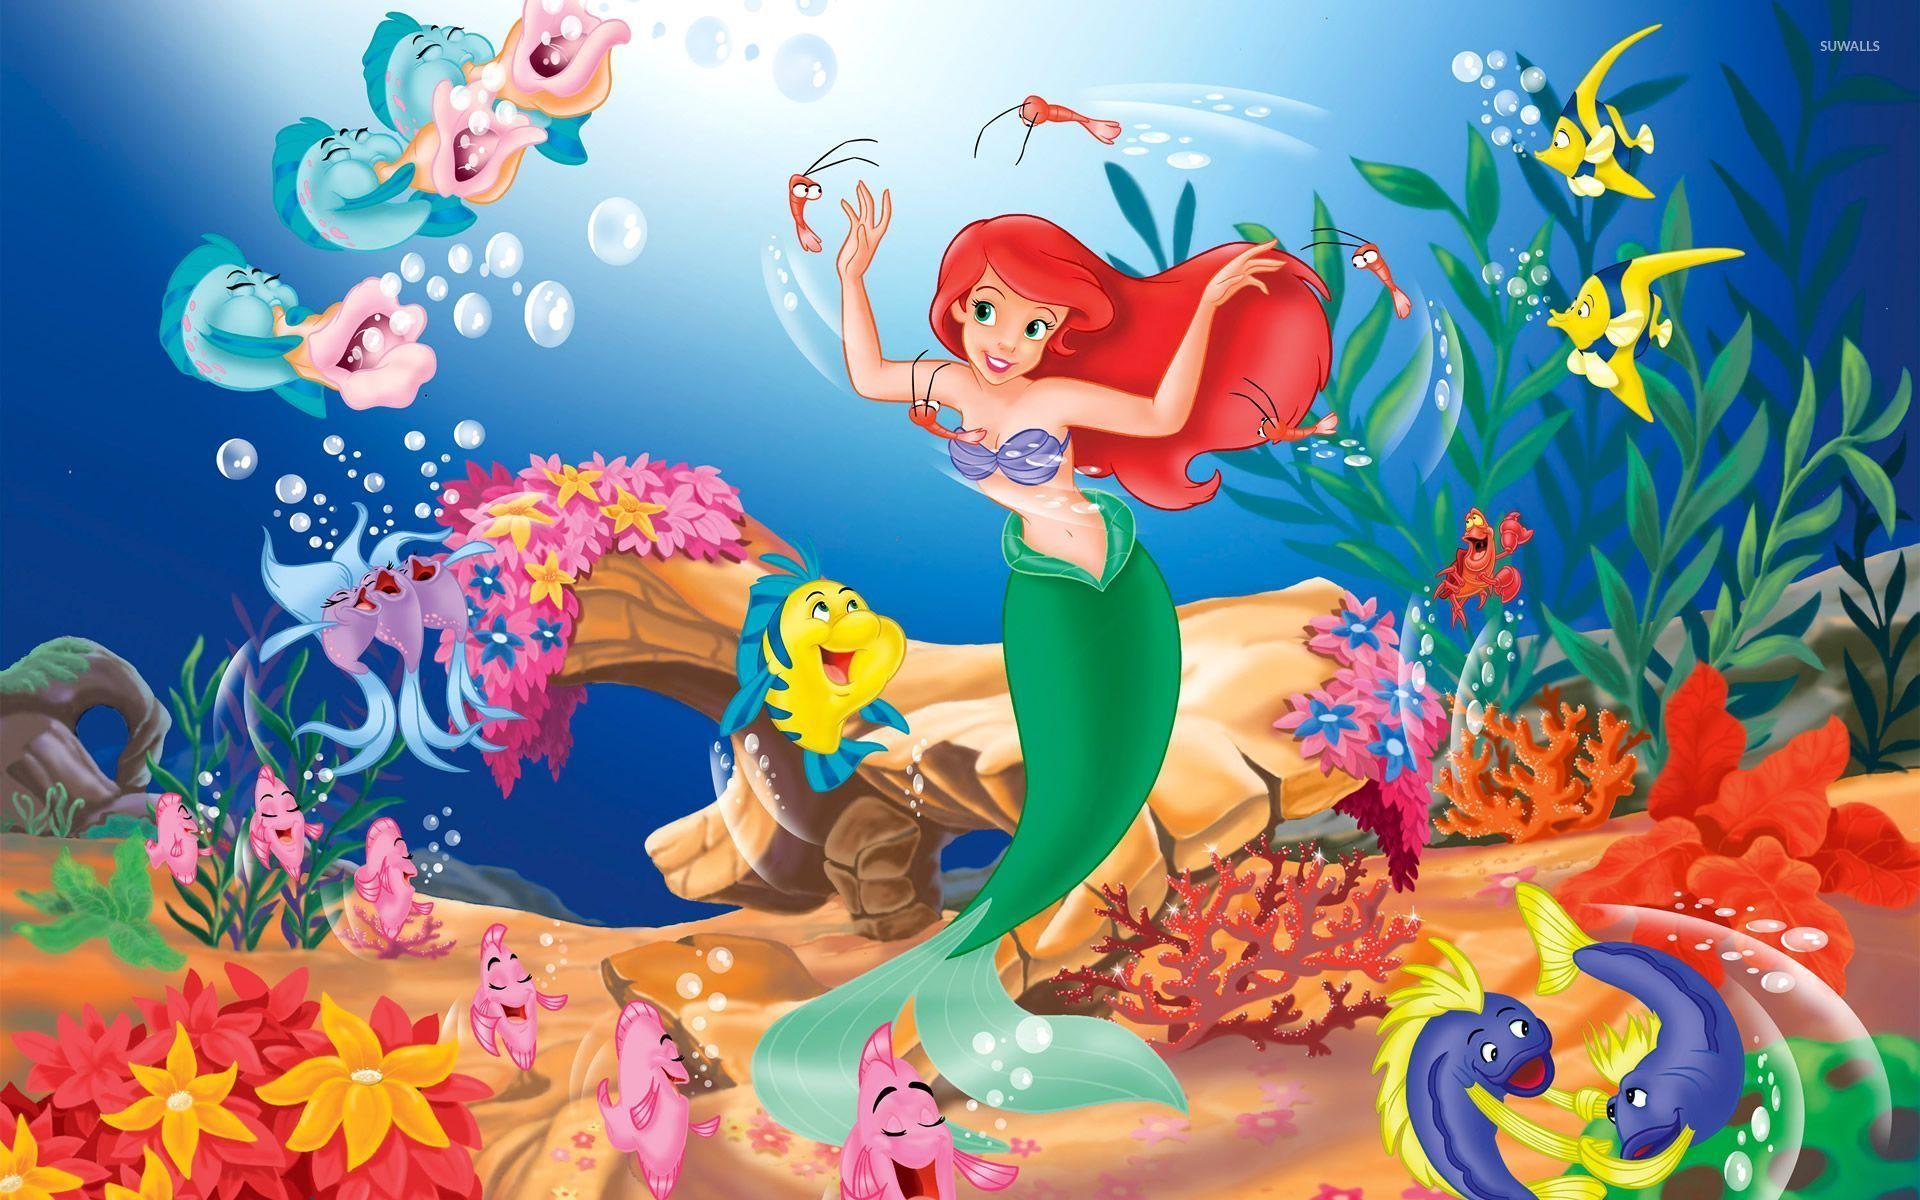 Eric and Ariel from The Little Mermaid wallpapers